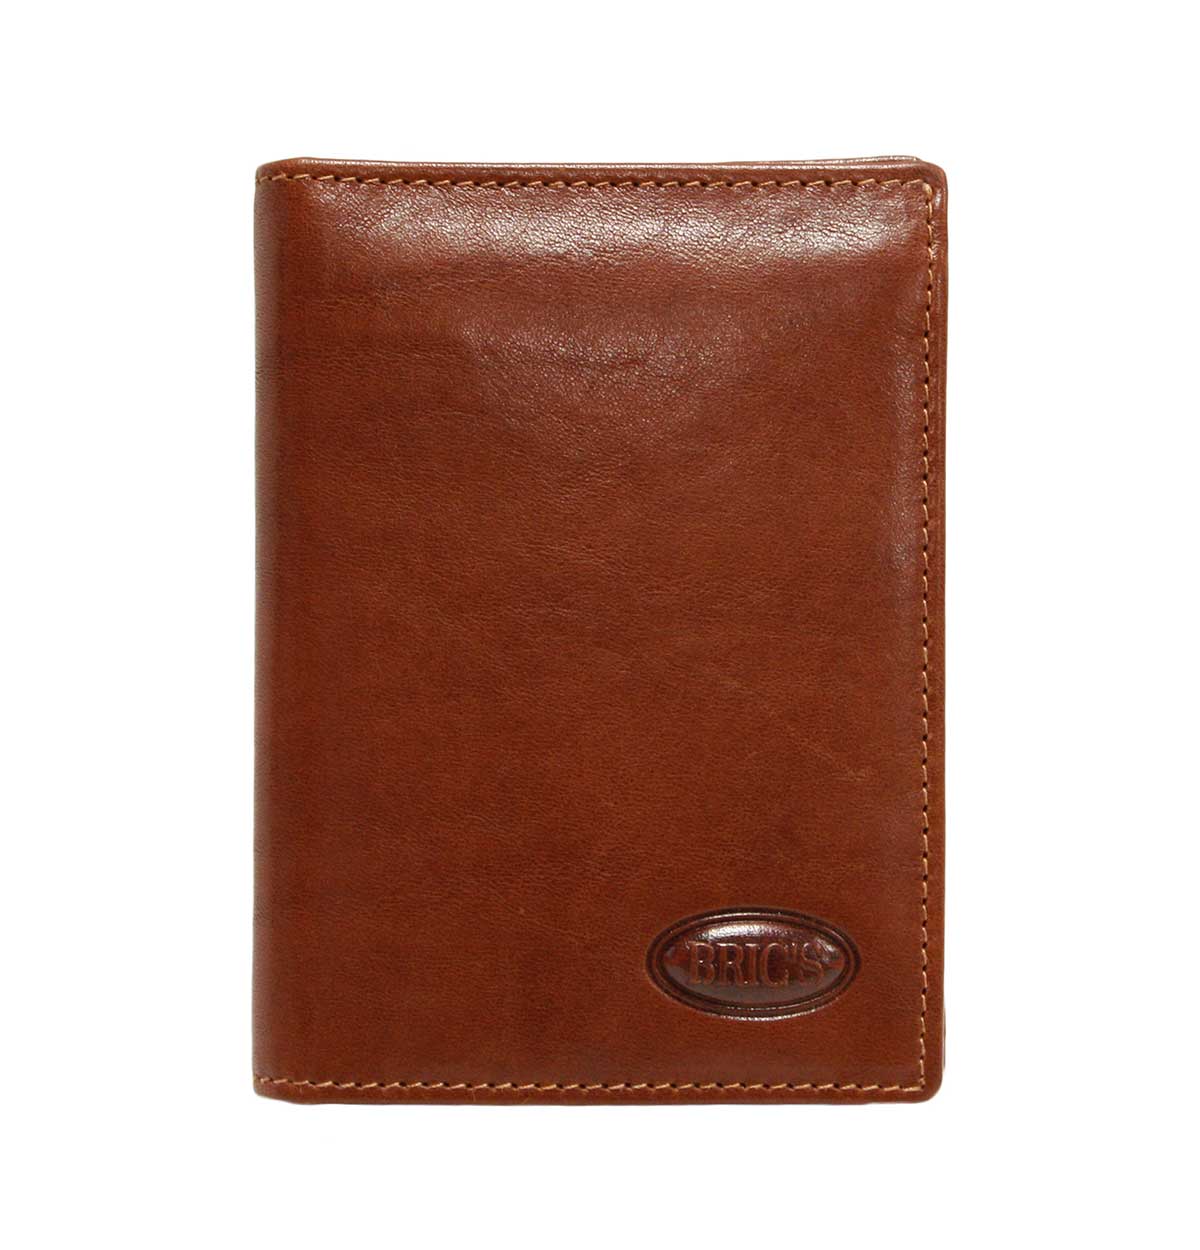 Monte Rosa Flip-Up Vertical Wallet With Id by Brics (Color: Tobacco)